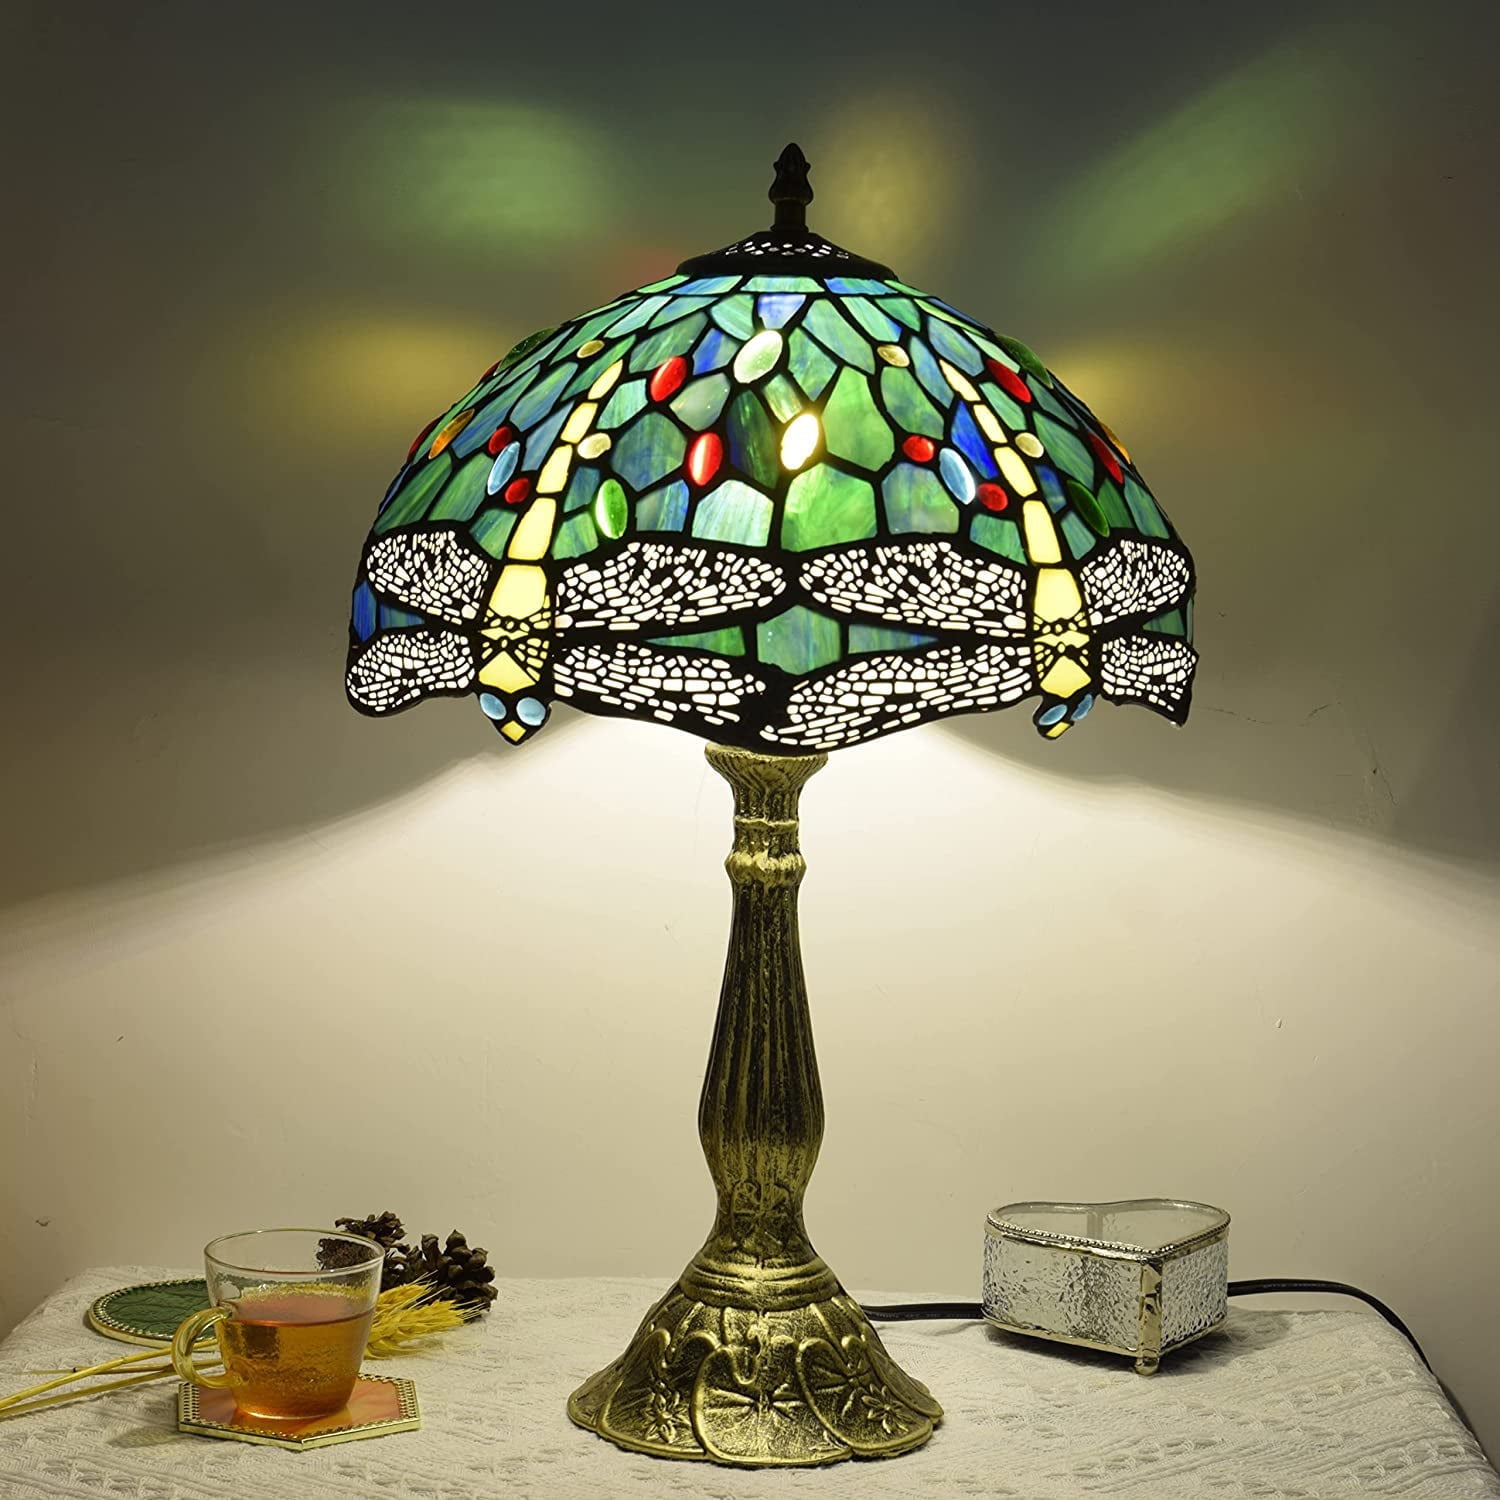 SHADY  Lamp Stained Glass Lamp Dragonfly Green Bedroom Table Lamp Reading Desk Light for Bedside Living Room Office Dormitory Dining Room Decorate  12x12x18 Include Light Bulb